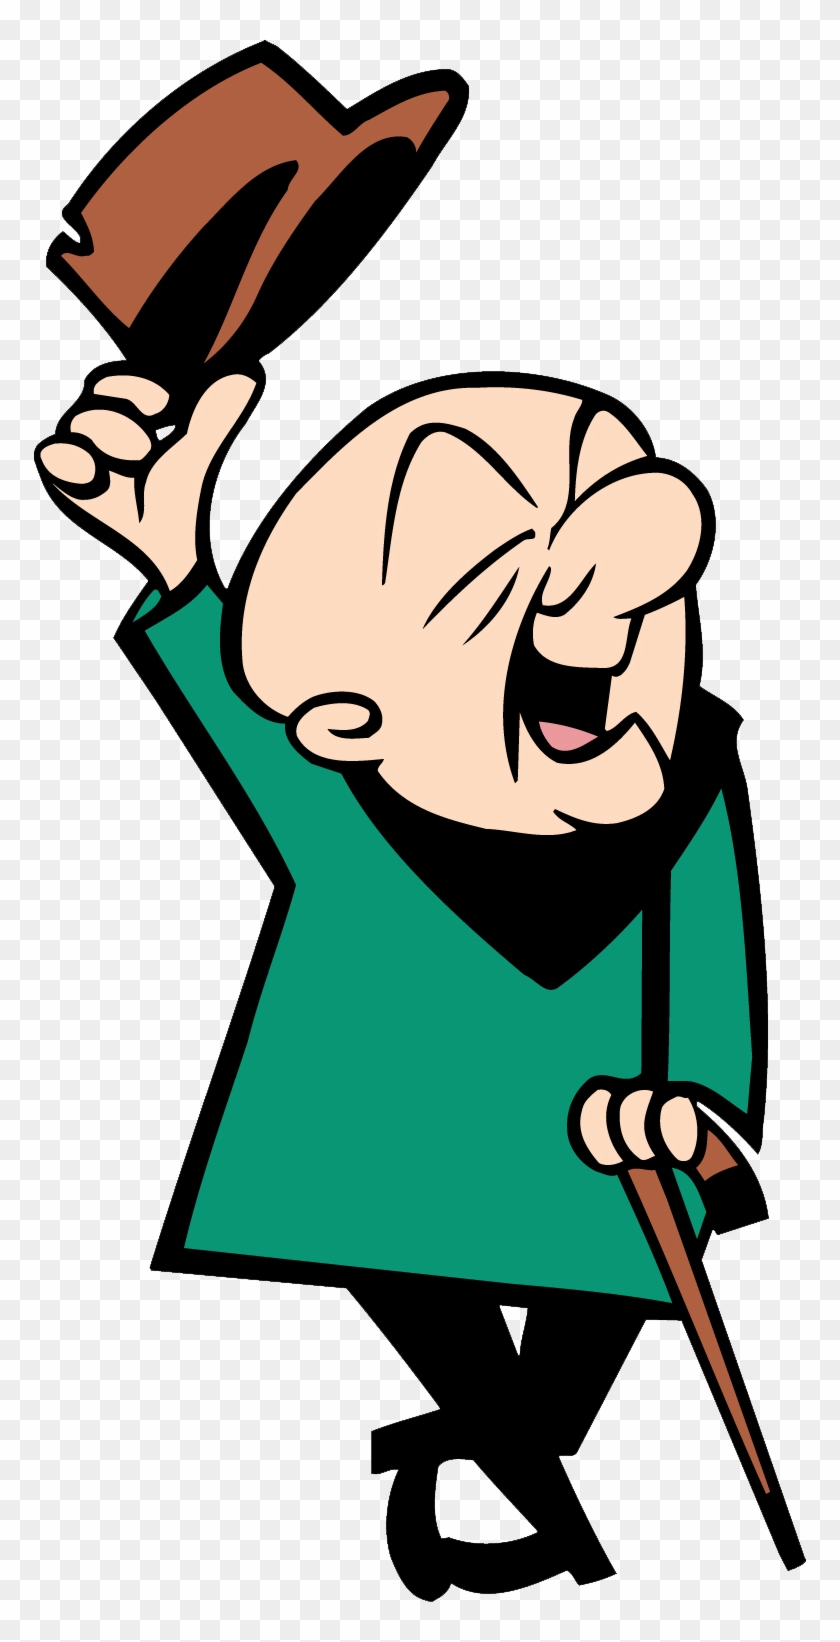 Mr Magoo Png - Mr Magoo Clipart is best quality and high resolution which c...